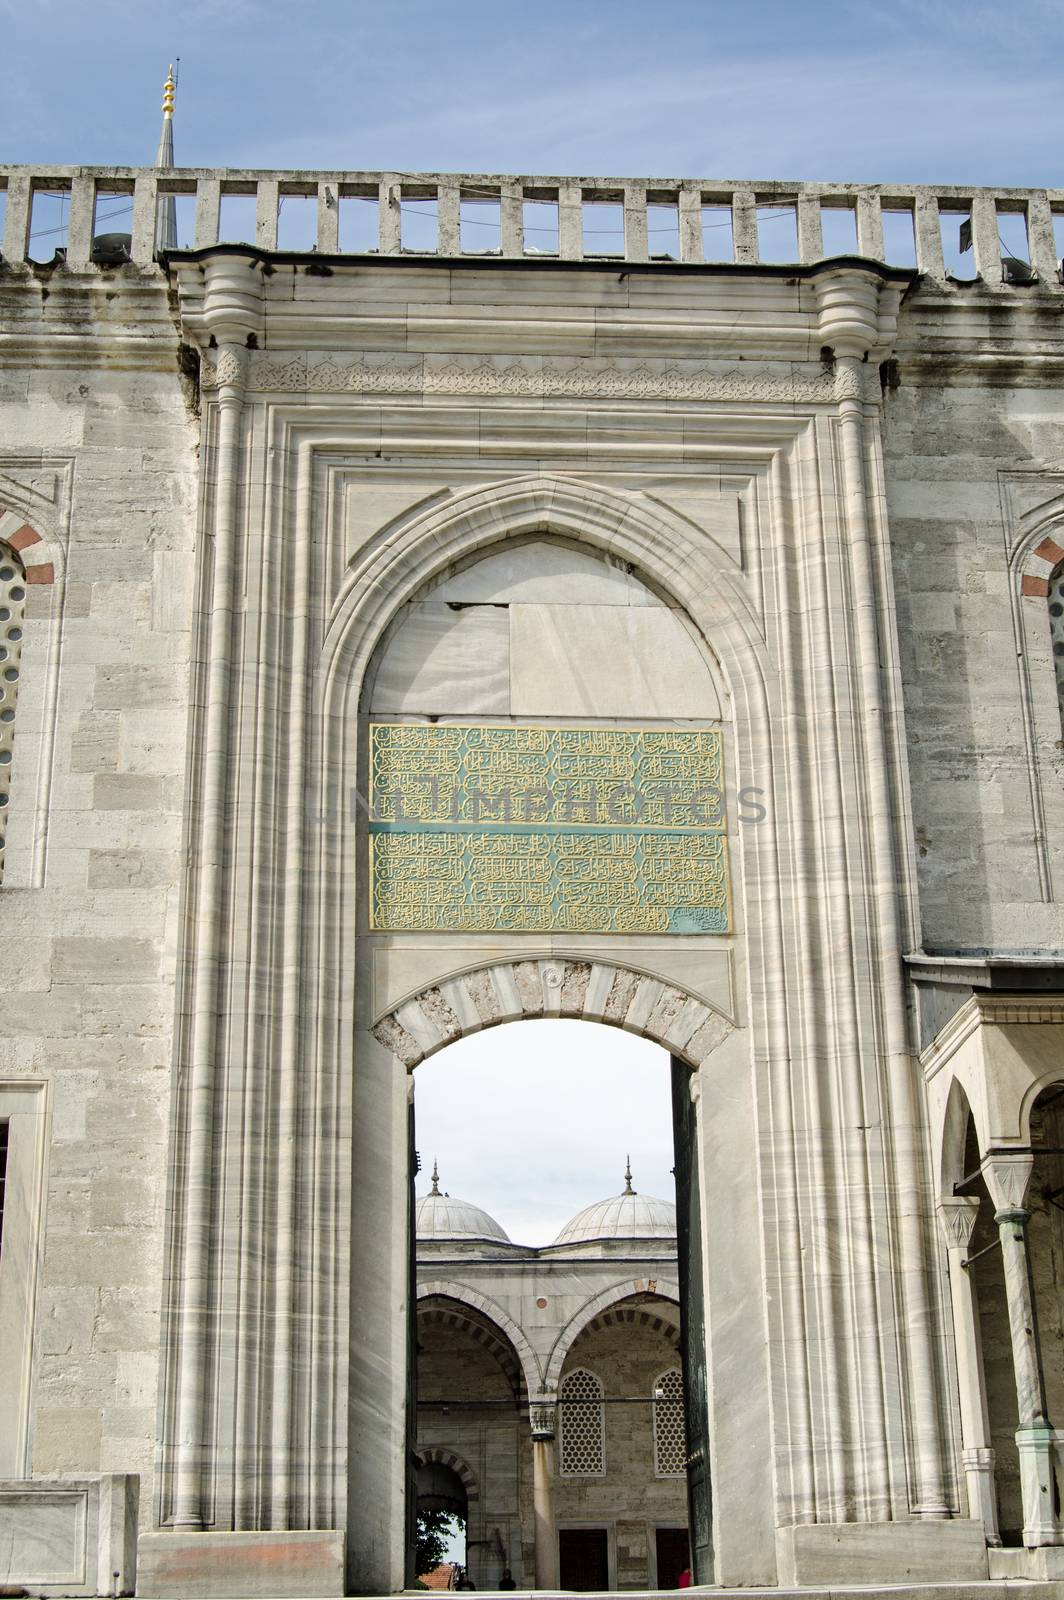 Entrance arch to a courtyard at Istanbul's Blue Mosque, Sultan Ahmet Camii.  